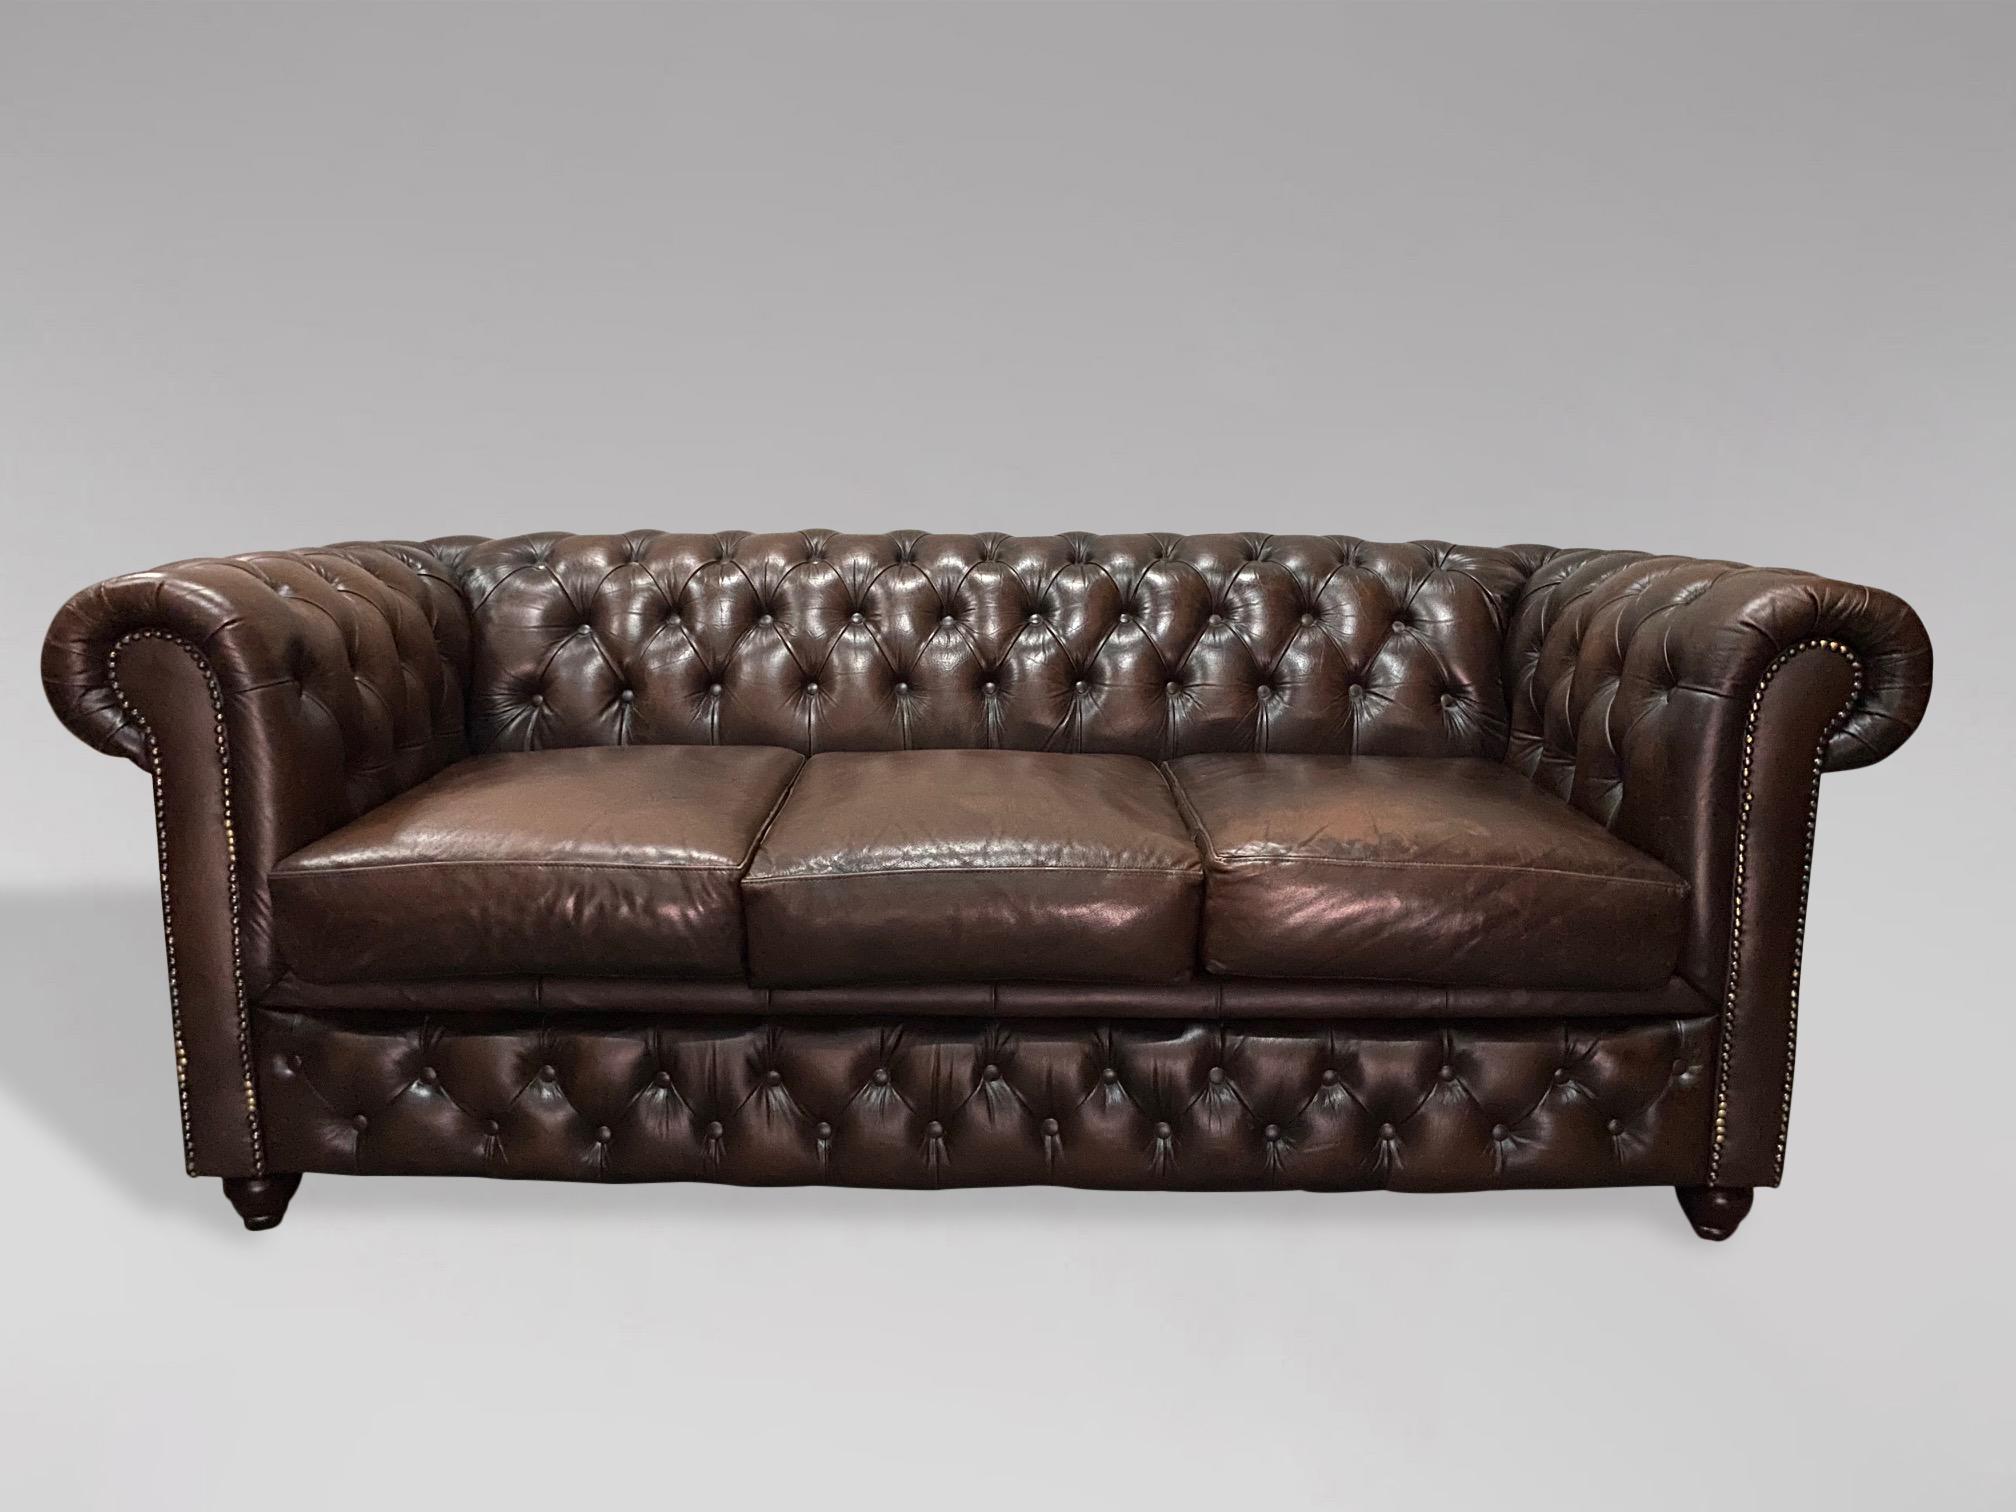 A 20th century large three seater vintage brown leather chesterfield with three large loose cushions, raised on 4 bun feet. A fine example of a good quality comfortable chesterfield. Very comfortable seating. A rather pleasing example.

The